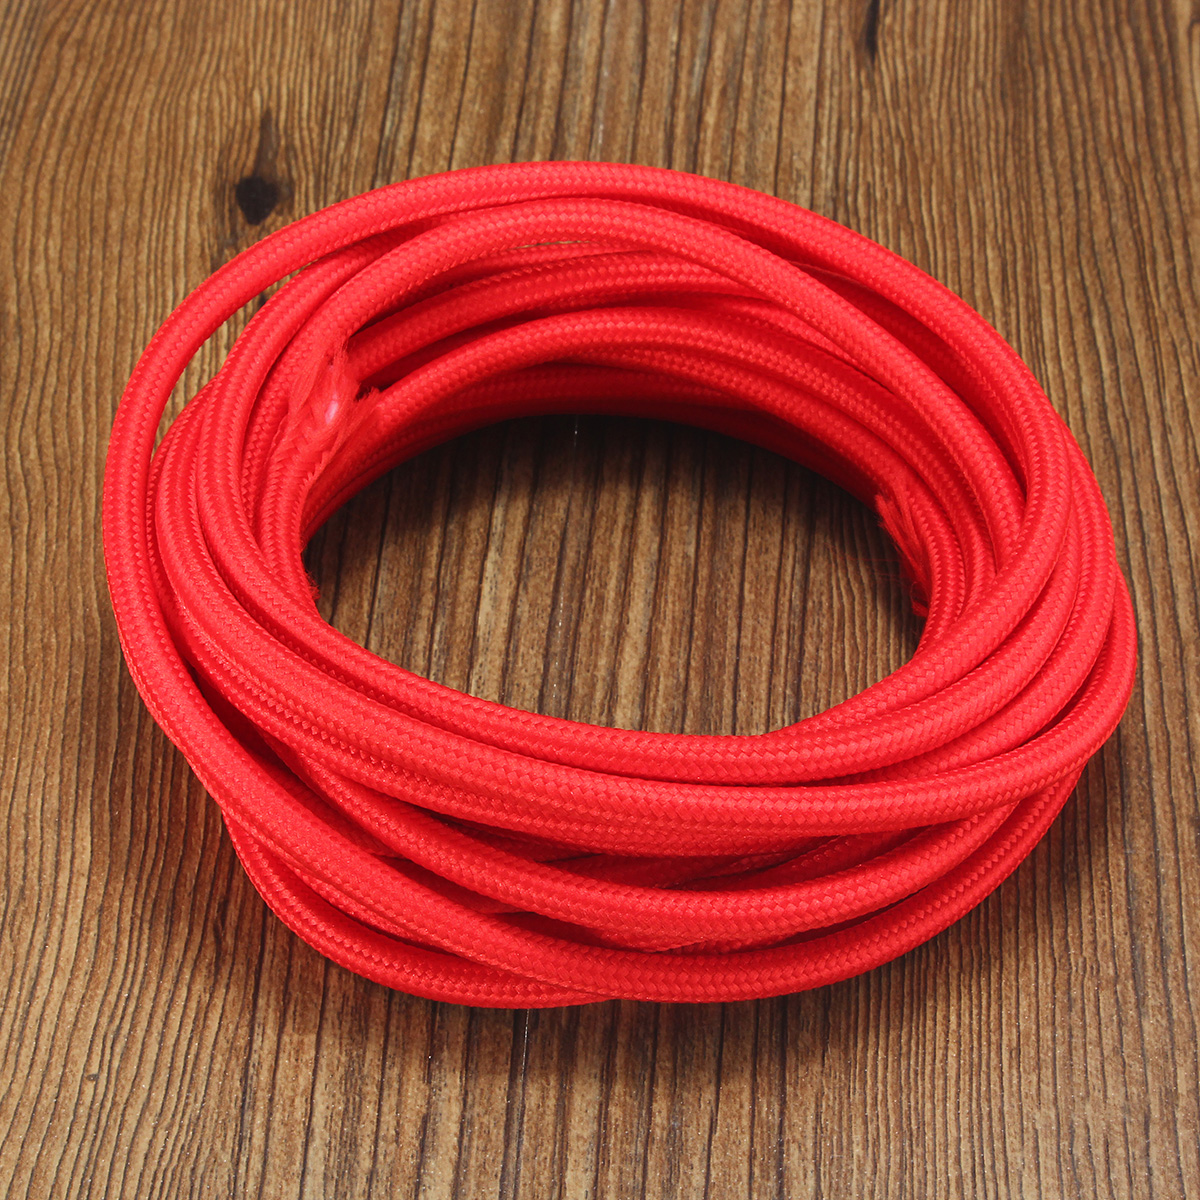 5M-2-Cord-Color-Vintage-Twist-Braided-Fabric-Light-Cable-Electric-Wire-1069142-6